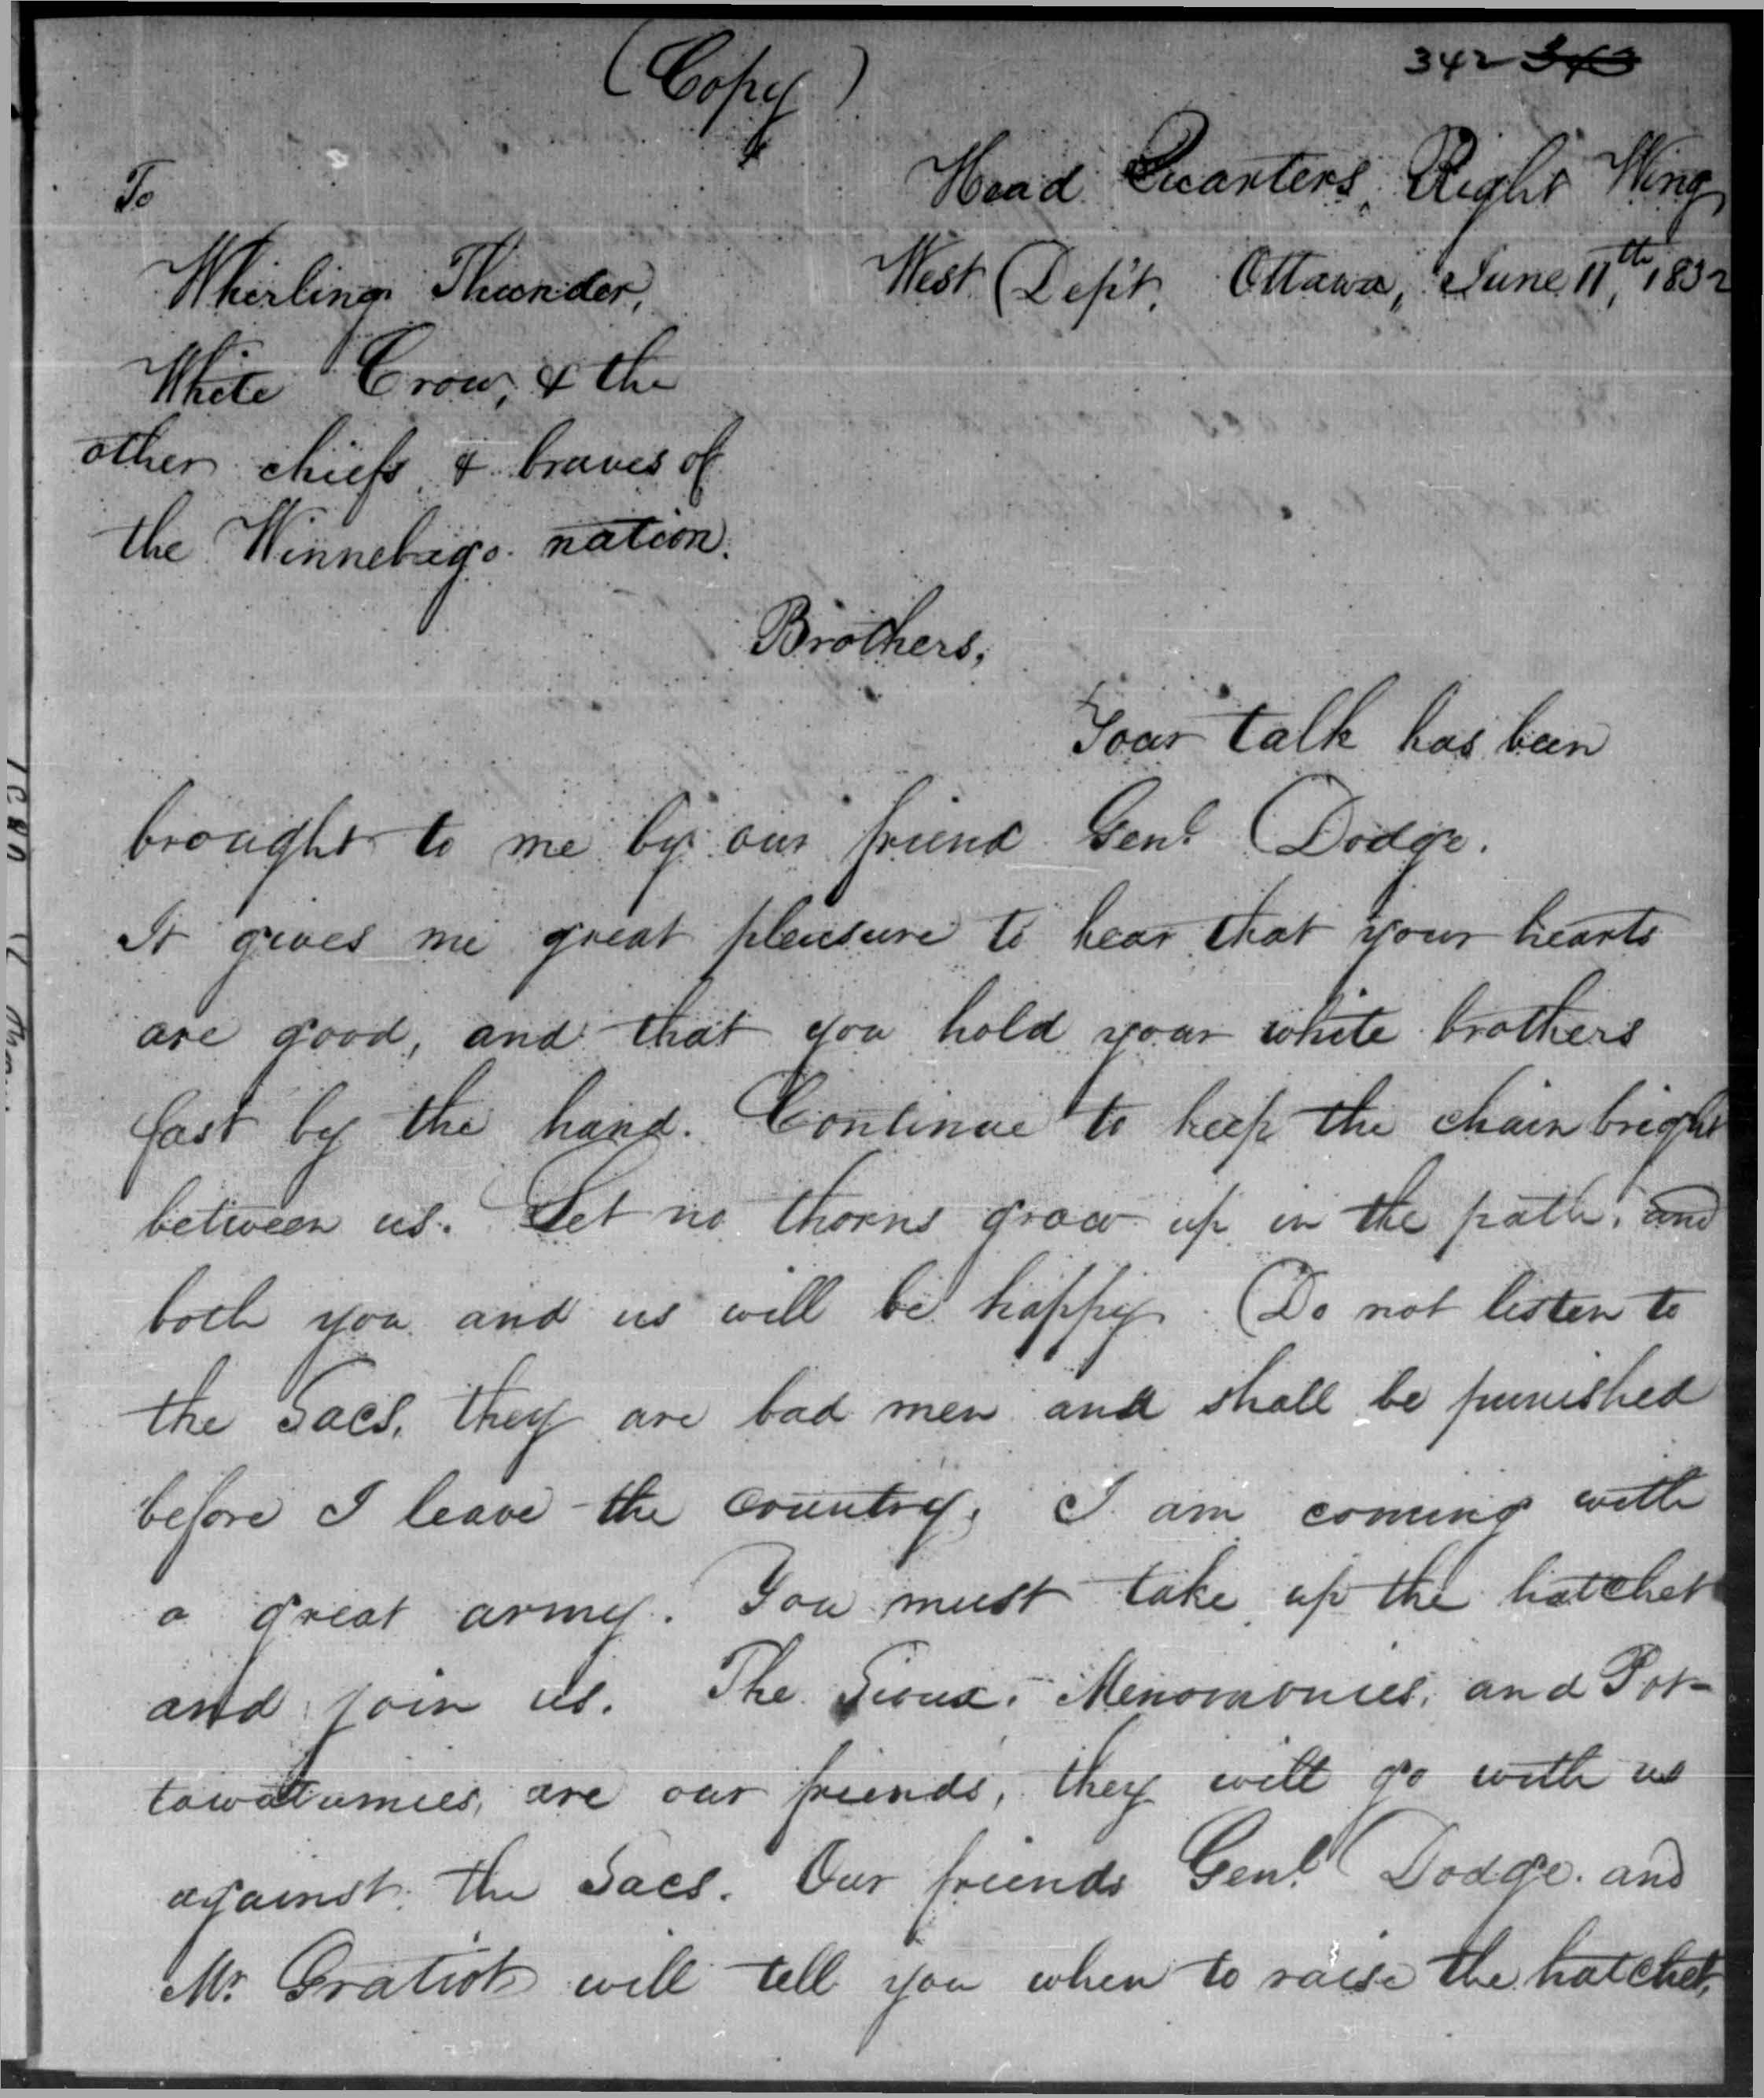 Letter from Henry Atkinson to Whirling Thunder, White Crow, and Other Chiefs and Braves of the Winnebago Nation, June 11, 1832, p. 1.